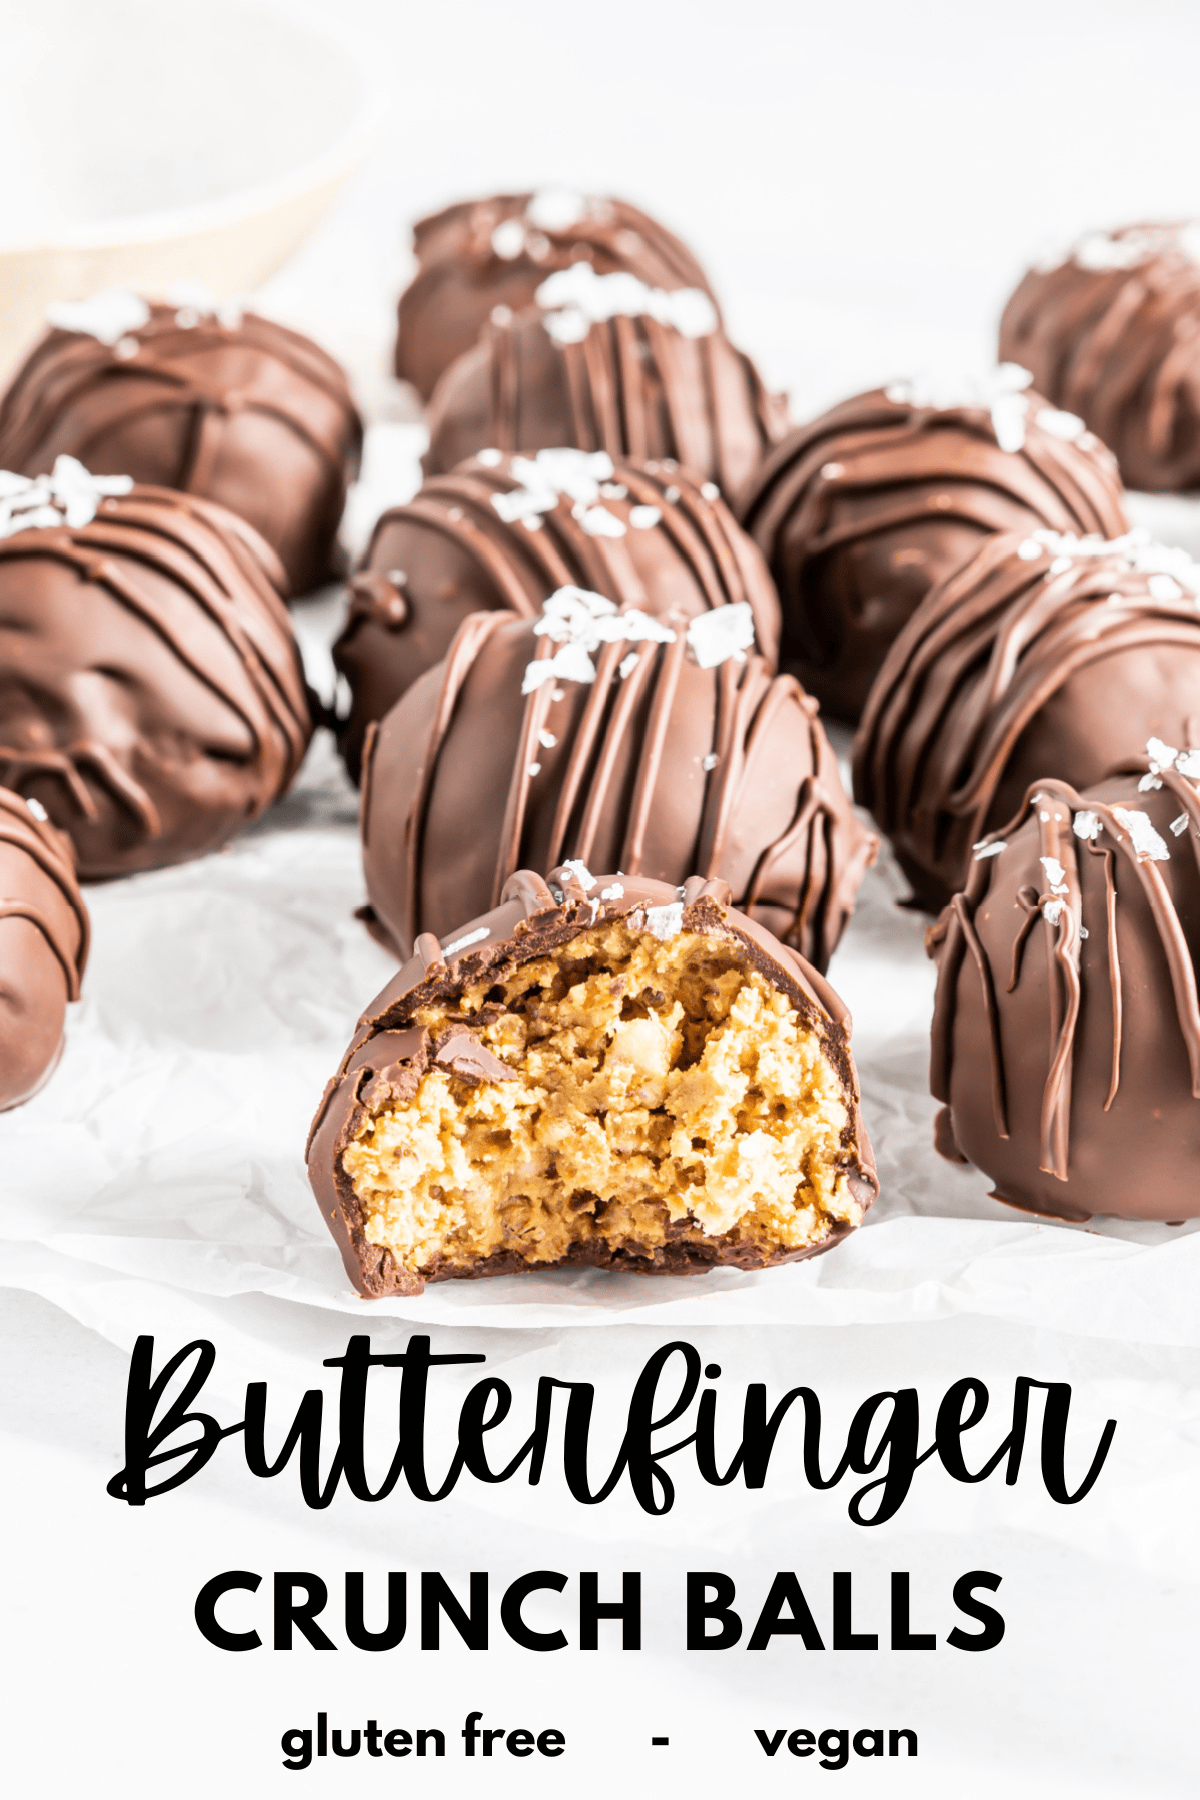 chocolate coated peanut butter crunch balls on white parchment paper; text underneath on white background reads "butterfinger crunch balls, gluten free and vegan"